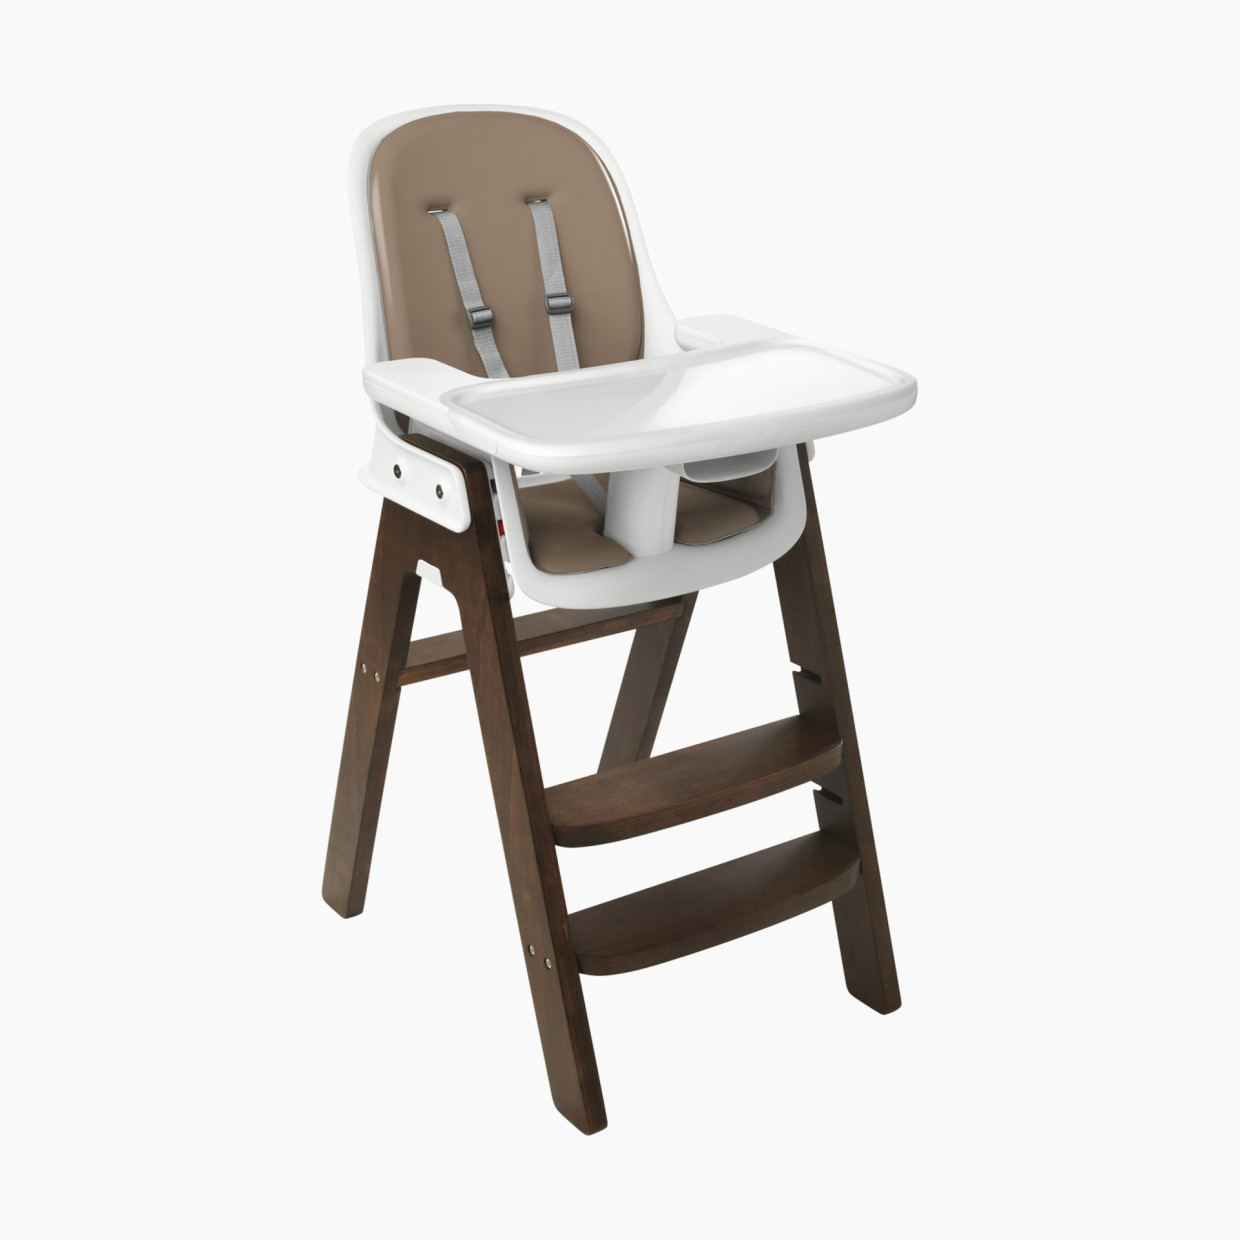 OXO Tot Sprout High Chair - Taupe/Walnut.